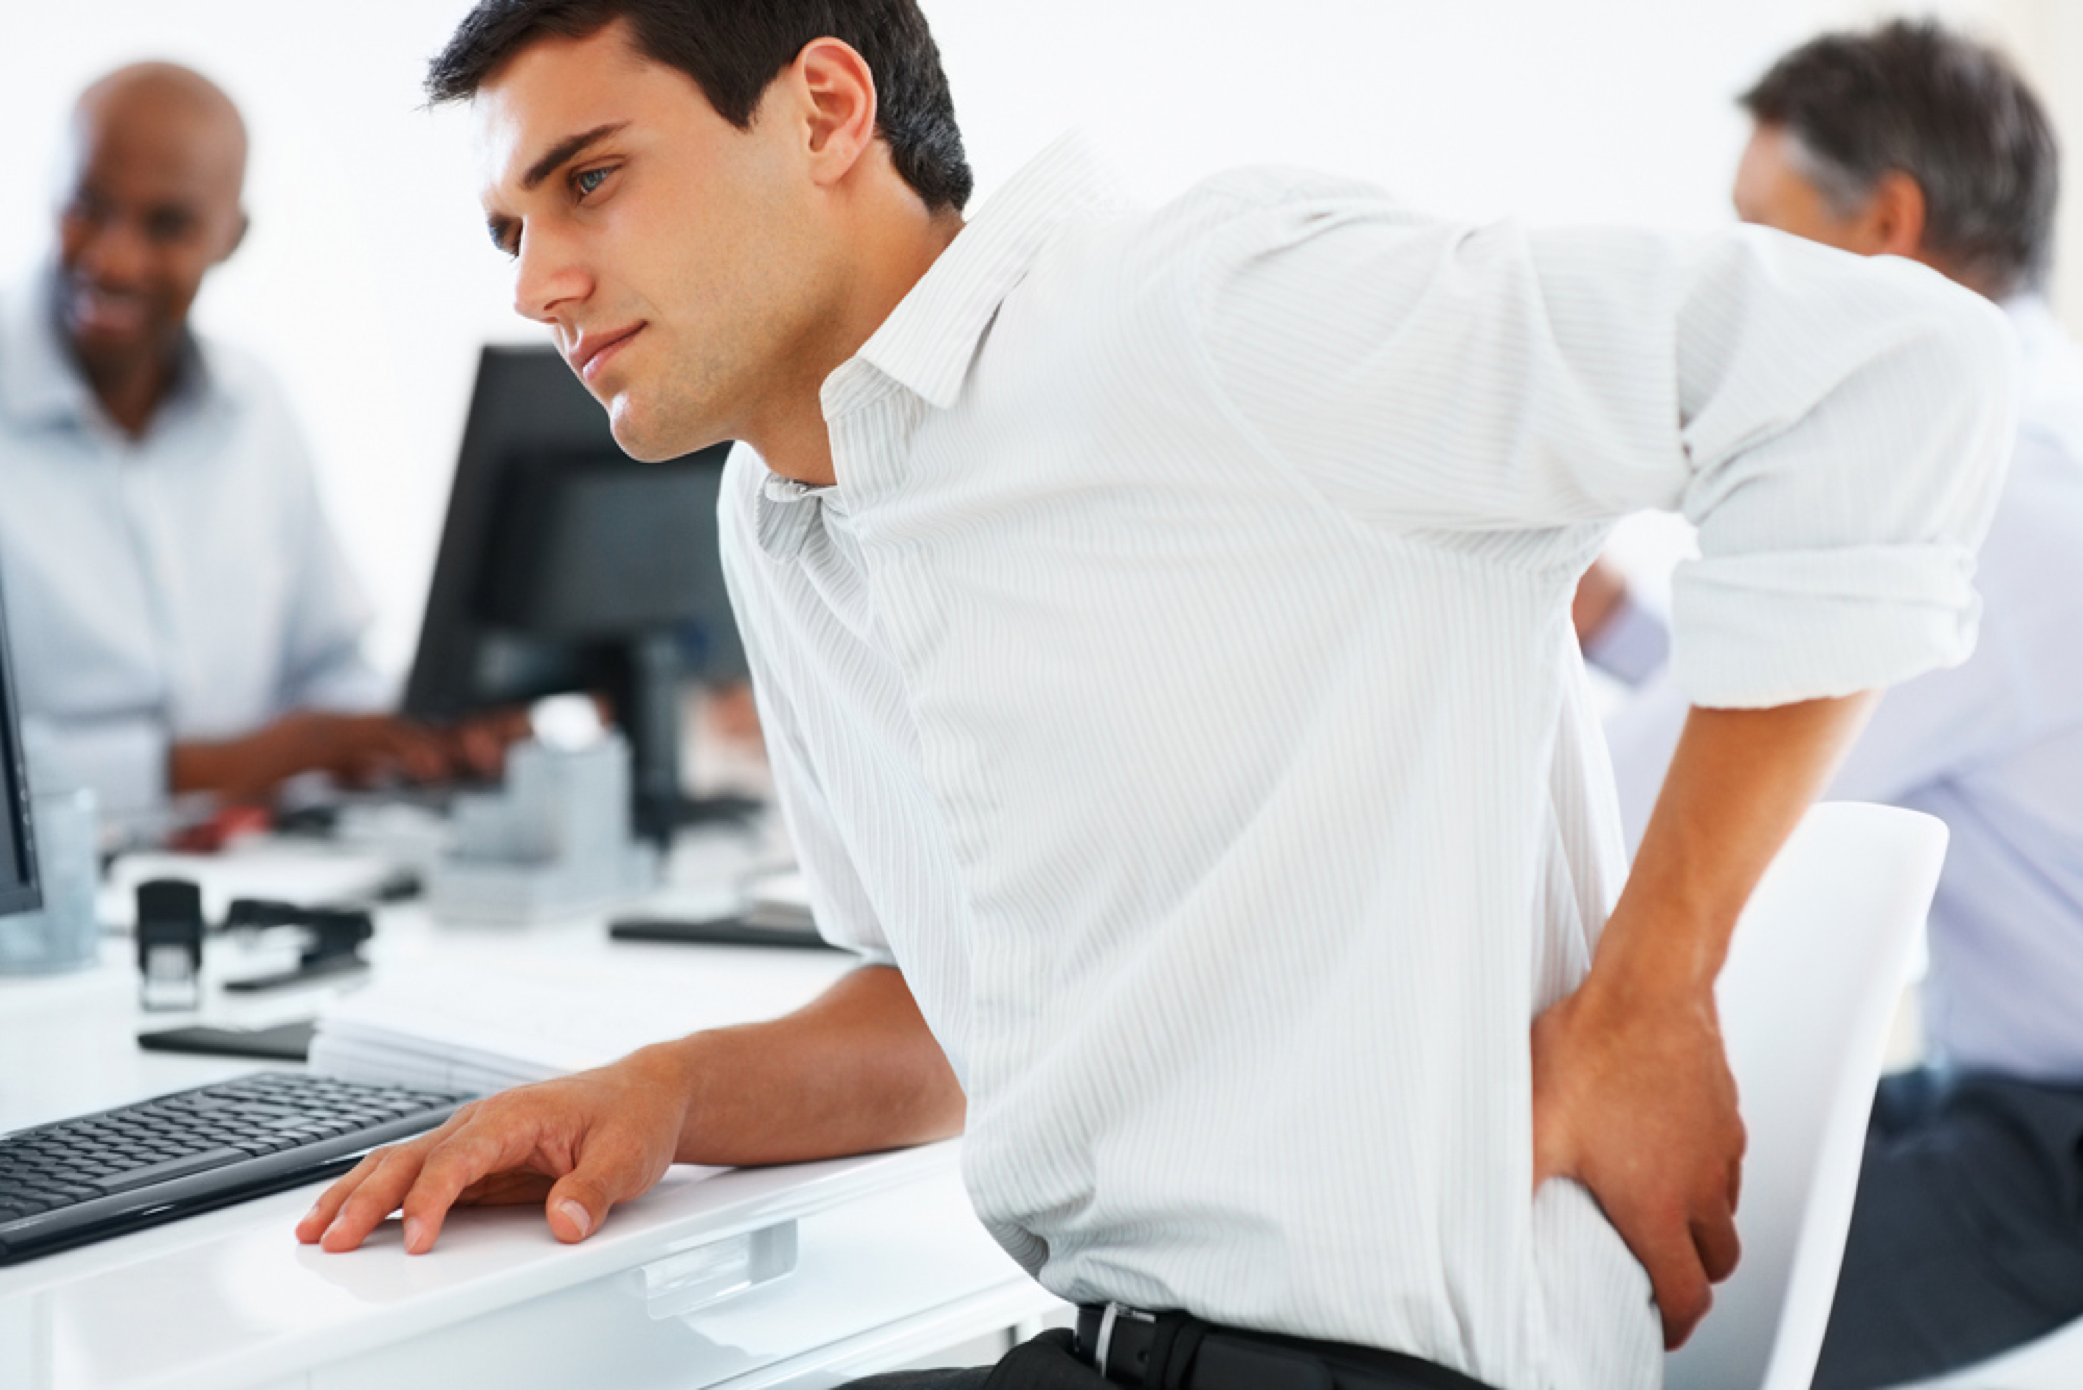 Sitting for extended periods of time can cause lower back pain.